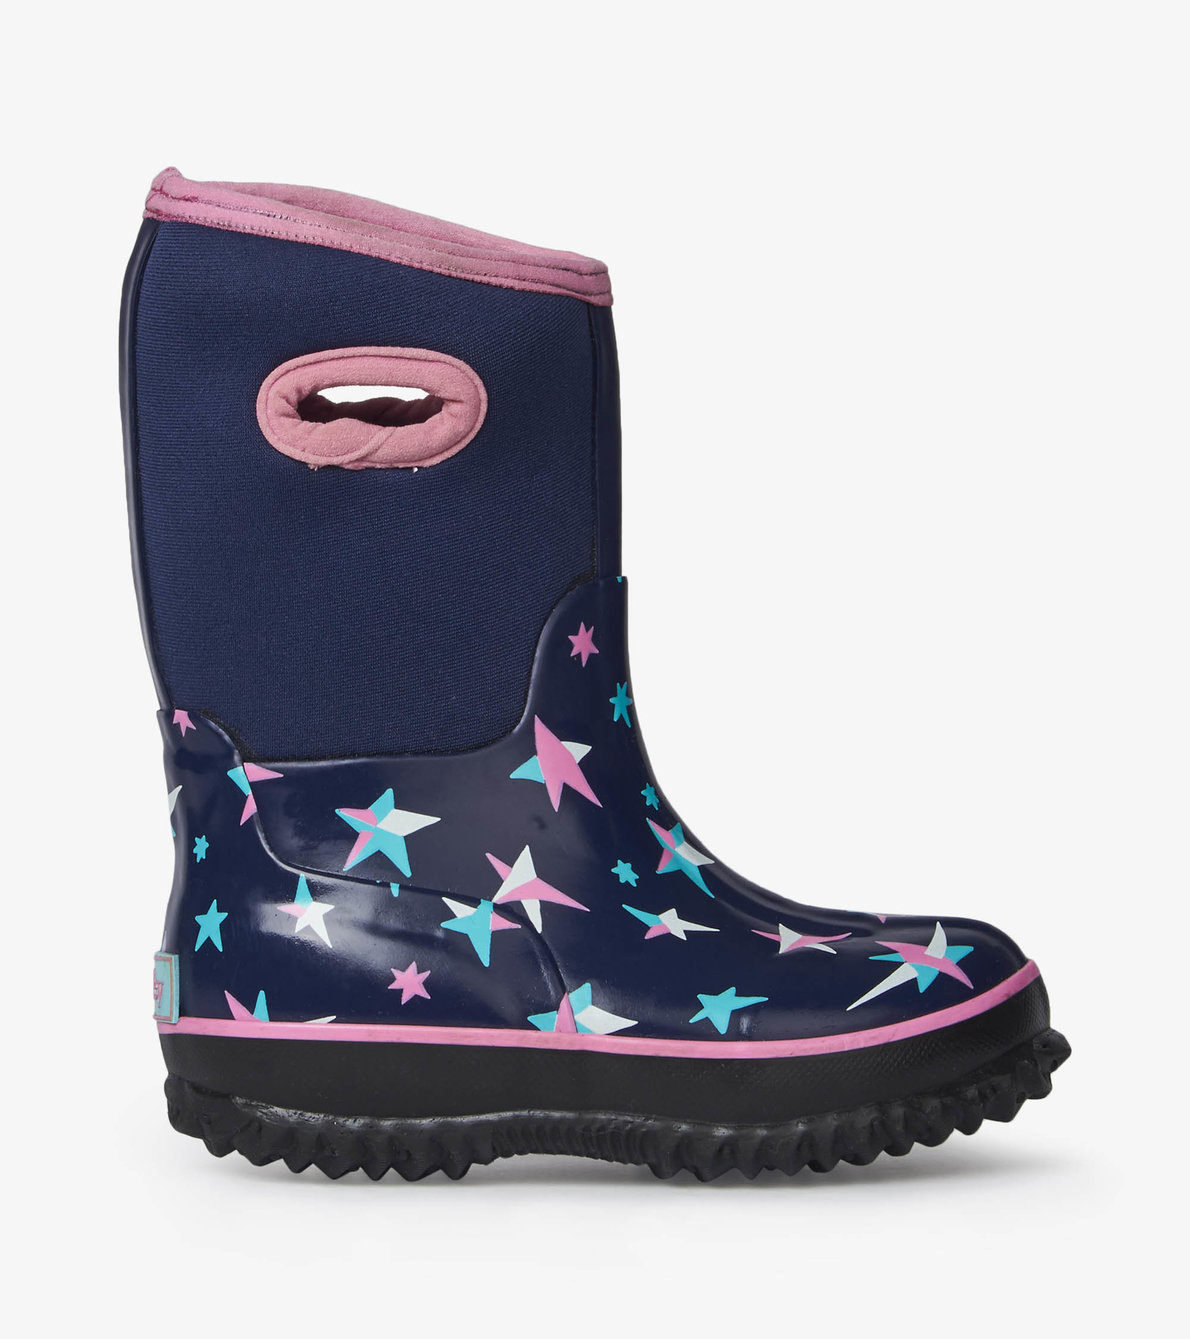 View larger image of Twinkle Stars All Weather Boots